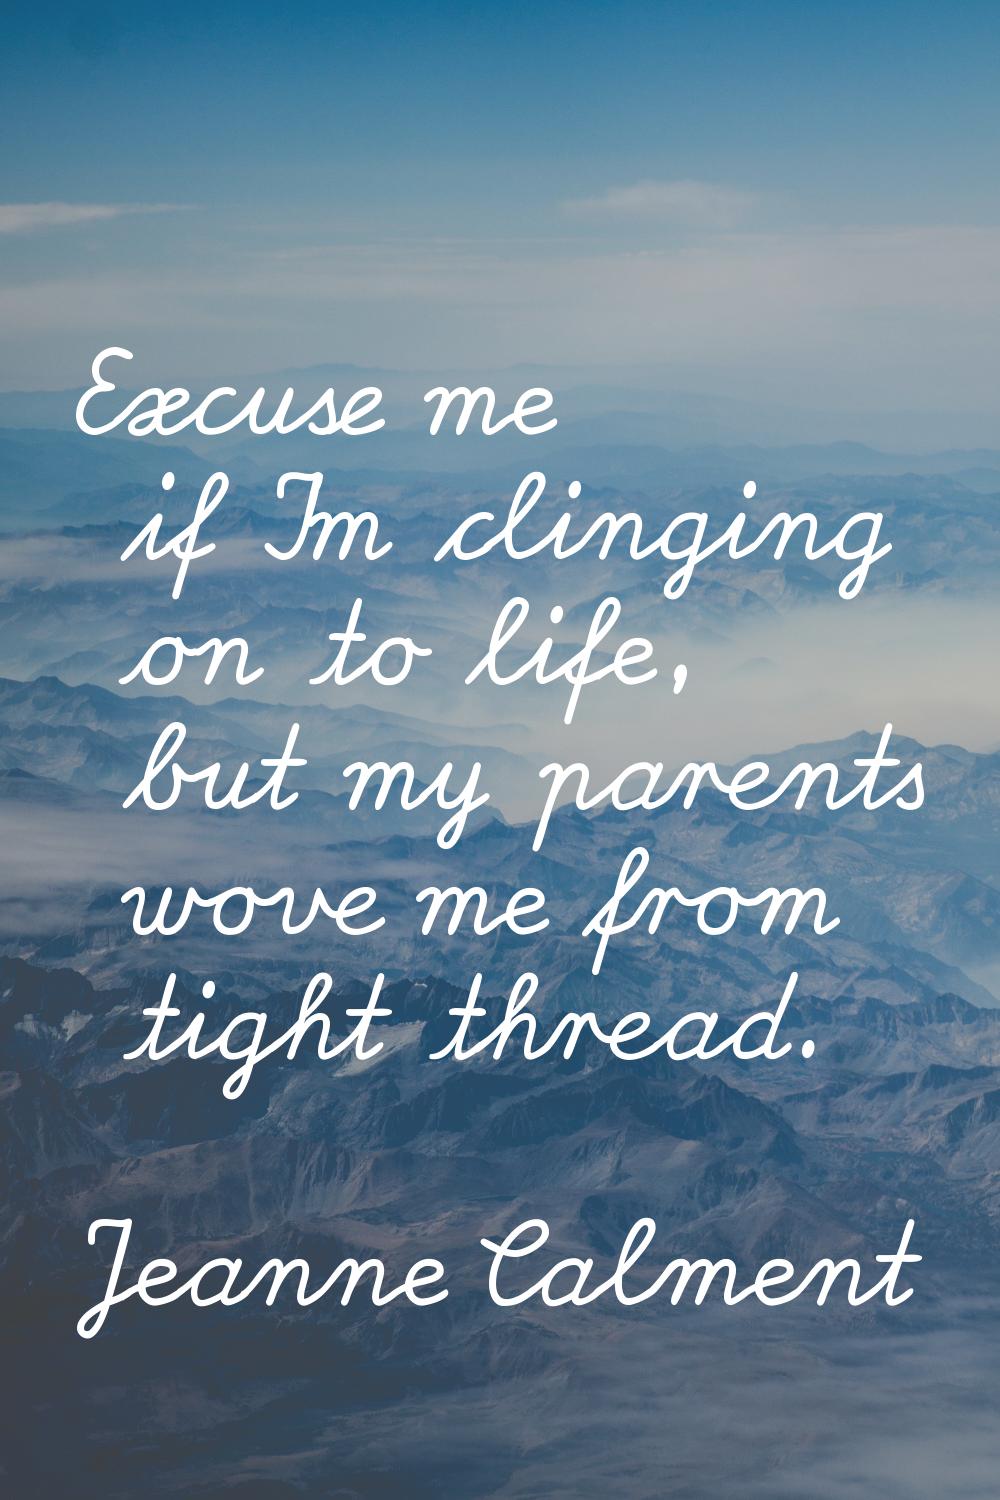 Excuse me if I'm clinging on to life, but my parents wove me from tight thread.